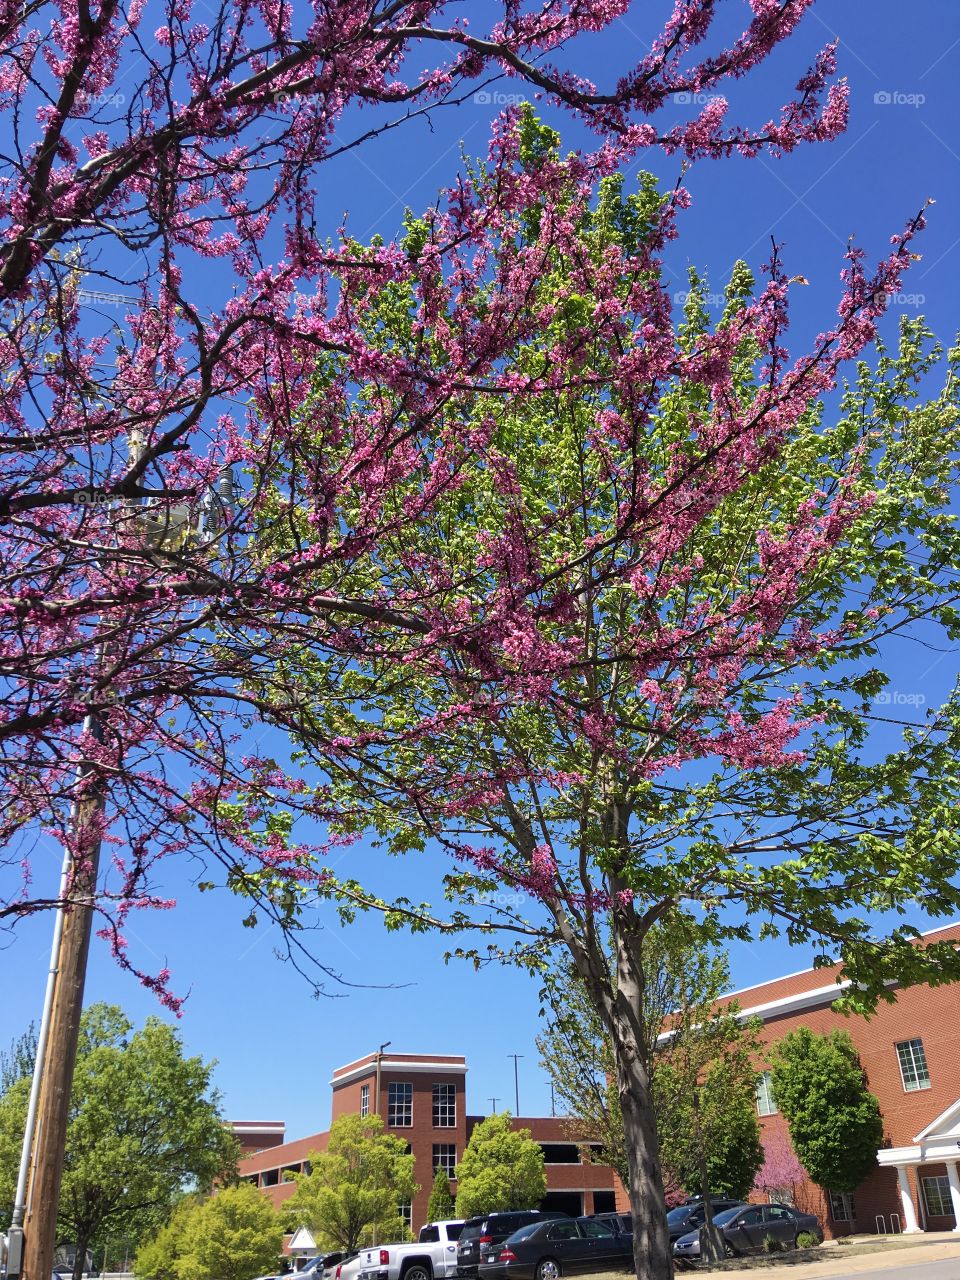 Two trees red bud is one. Across from church dark blue sky. Spring is everywhere!